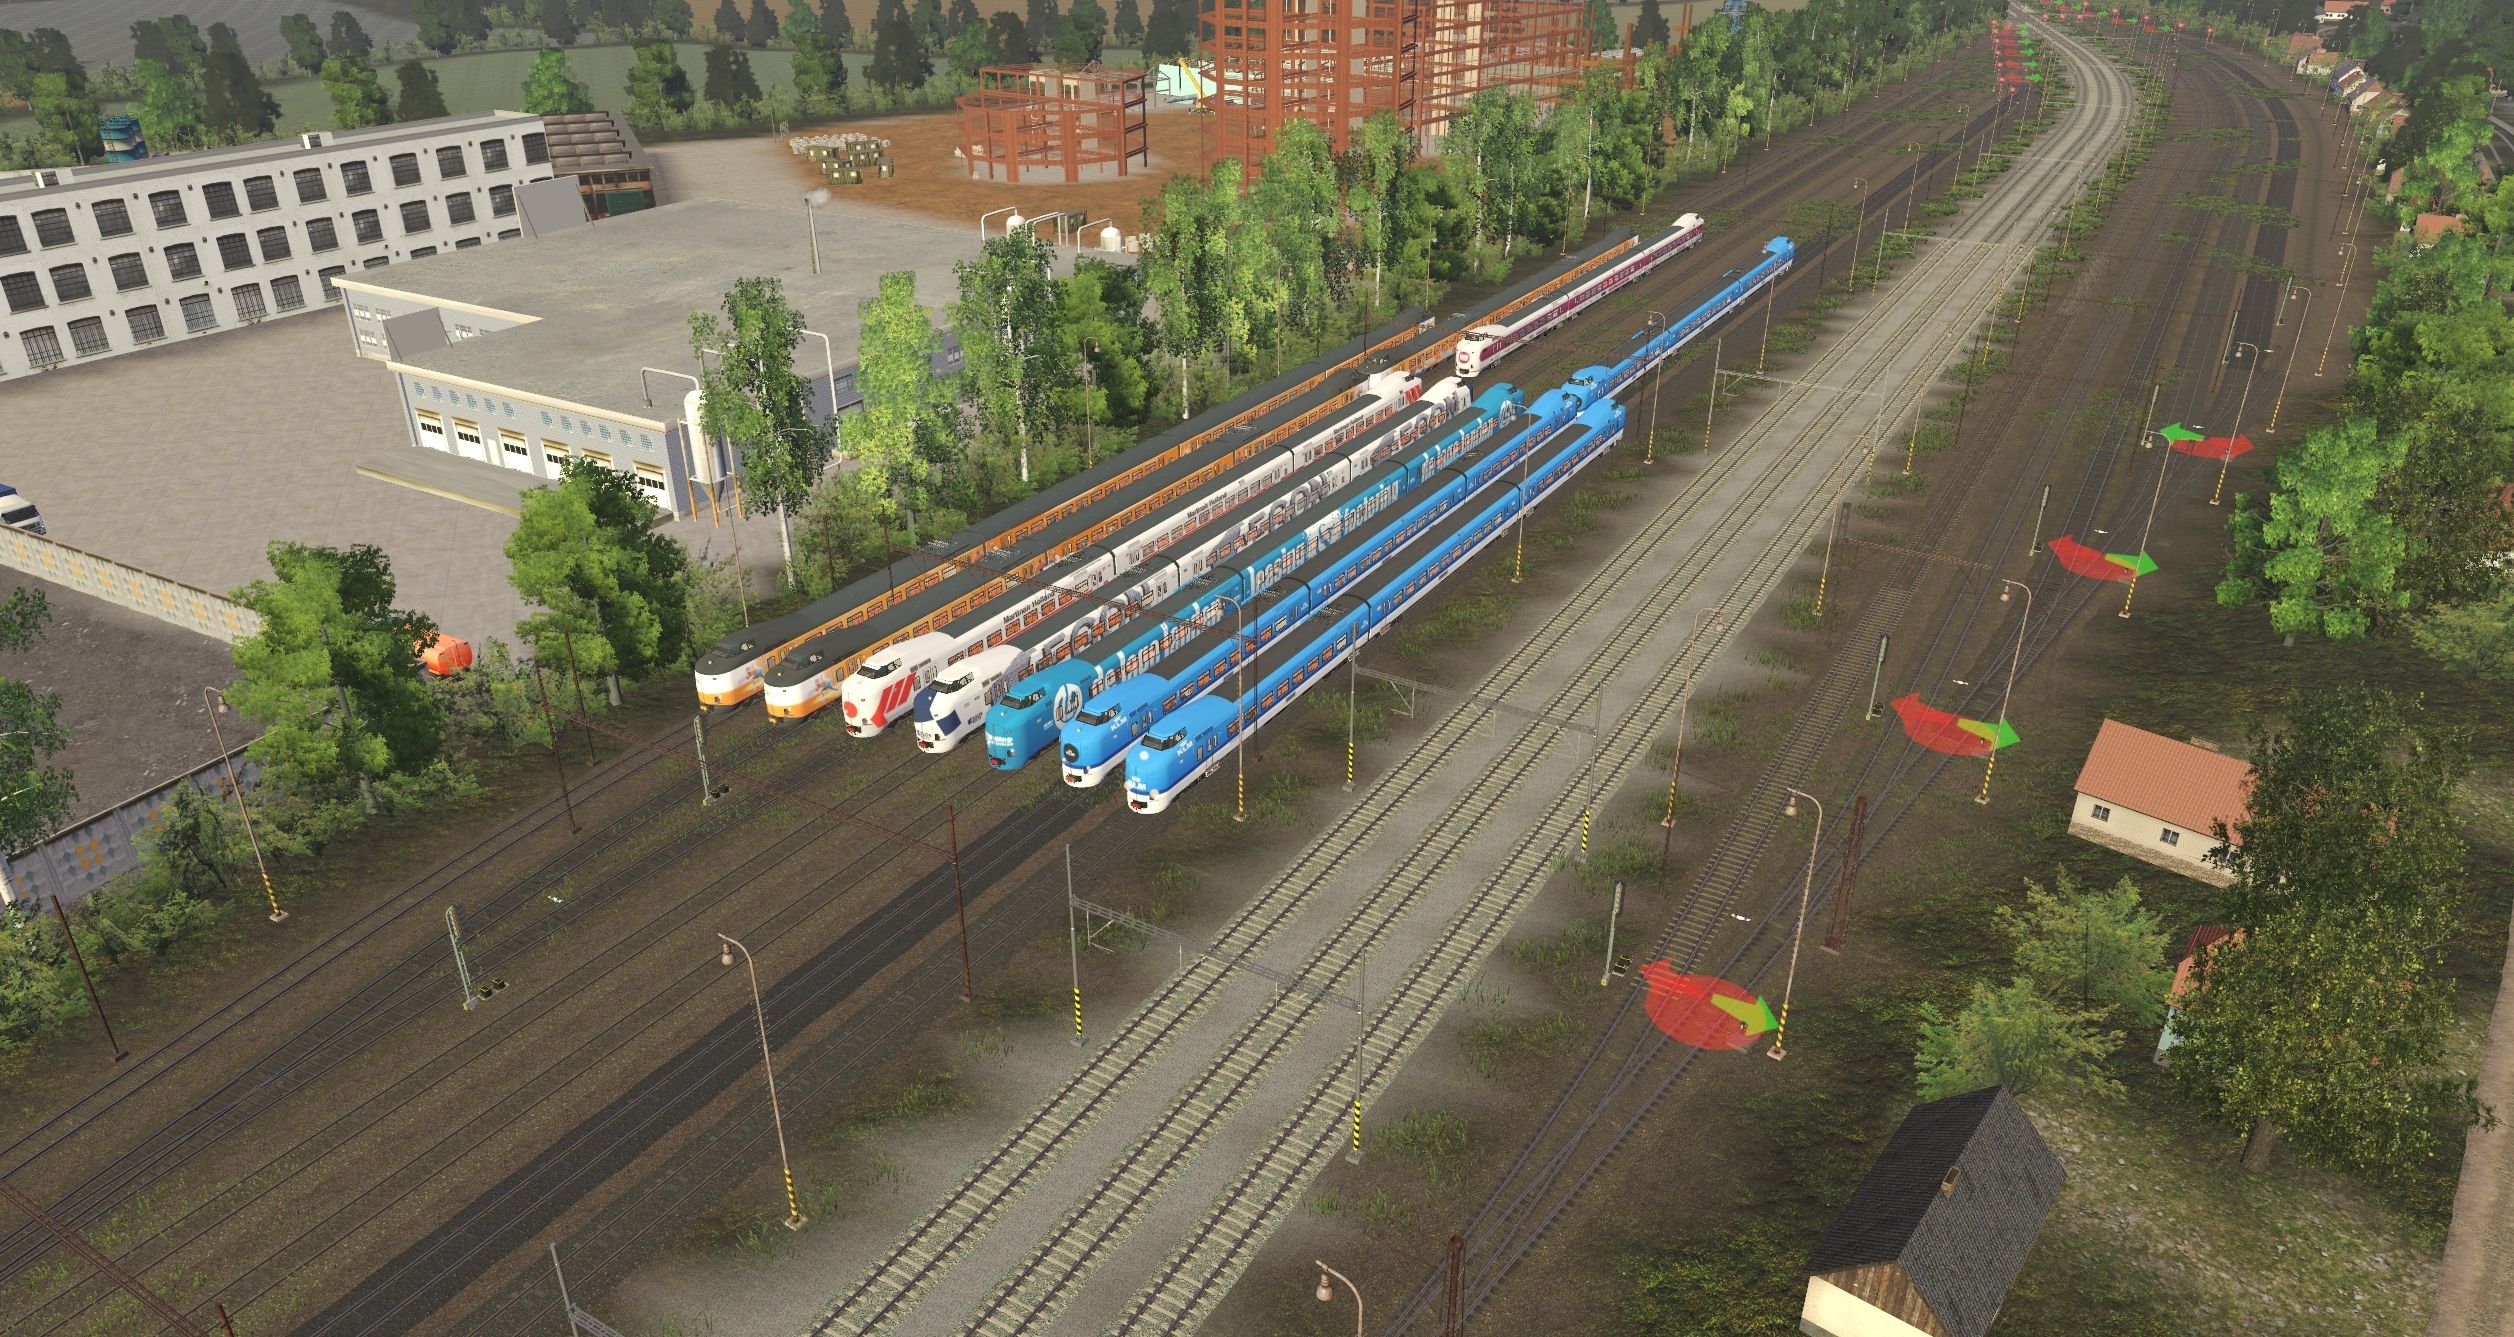 Playing-with-the-NS-ICM-Trains-on-Central-Europe%2C--3-Car%2C--2-x-3-car-with-Walkthrough%2C-and-a-4-car-in-Intresting-liveries.jpg